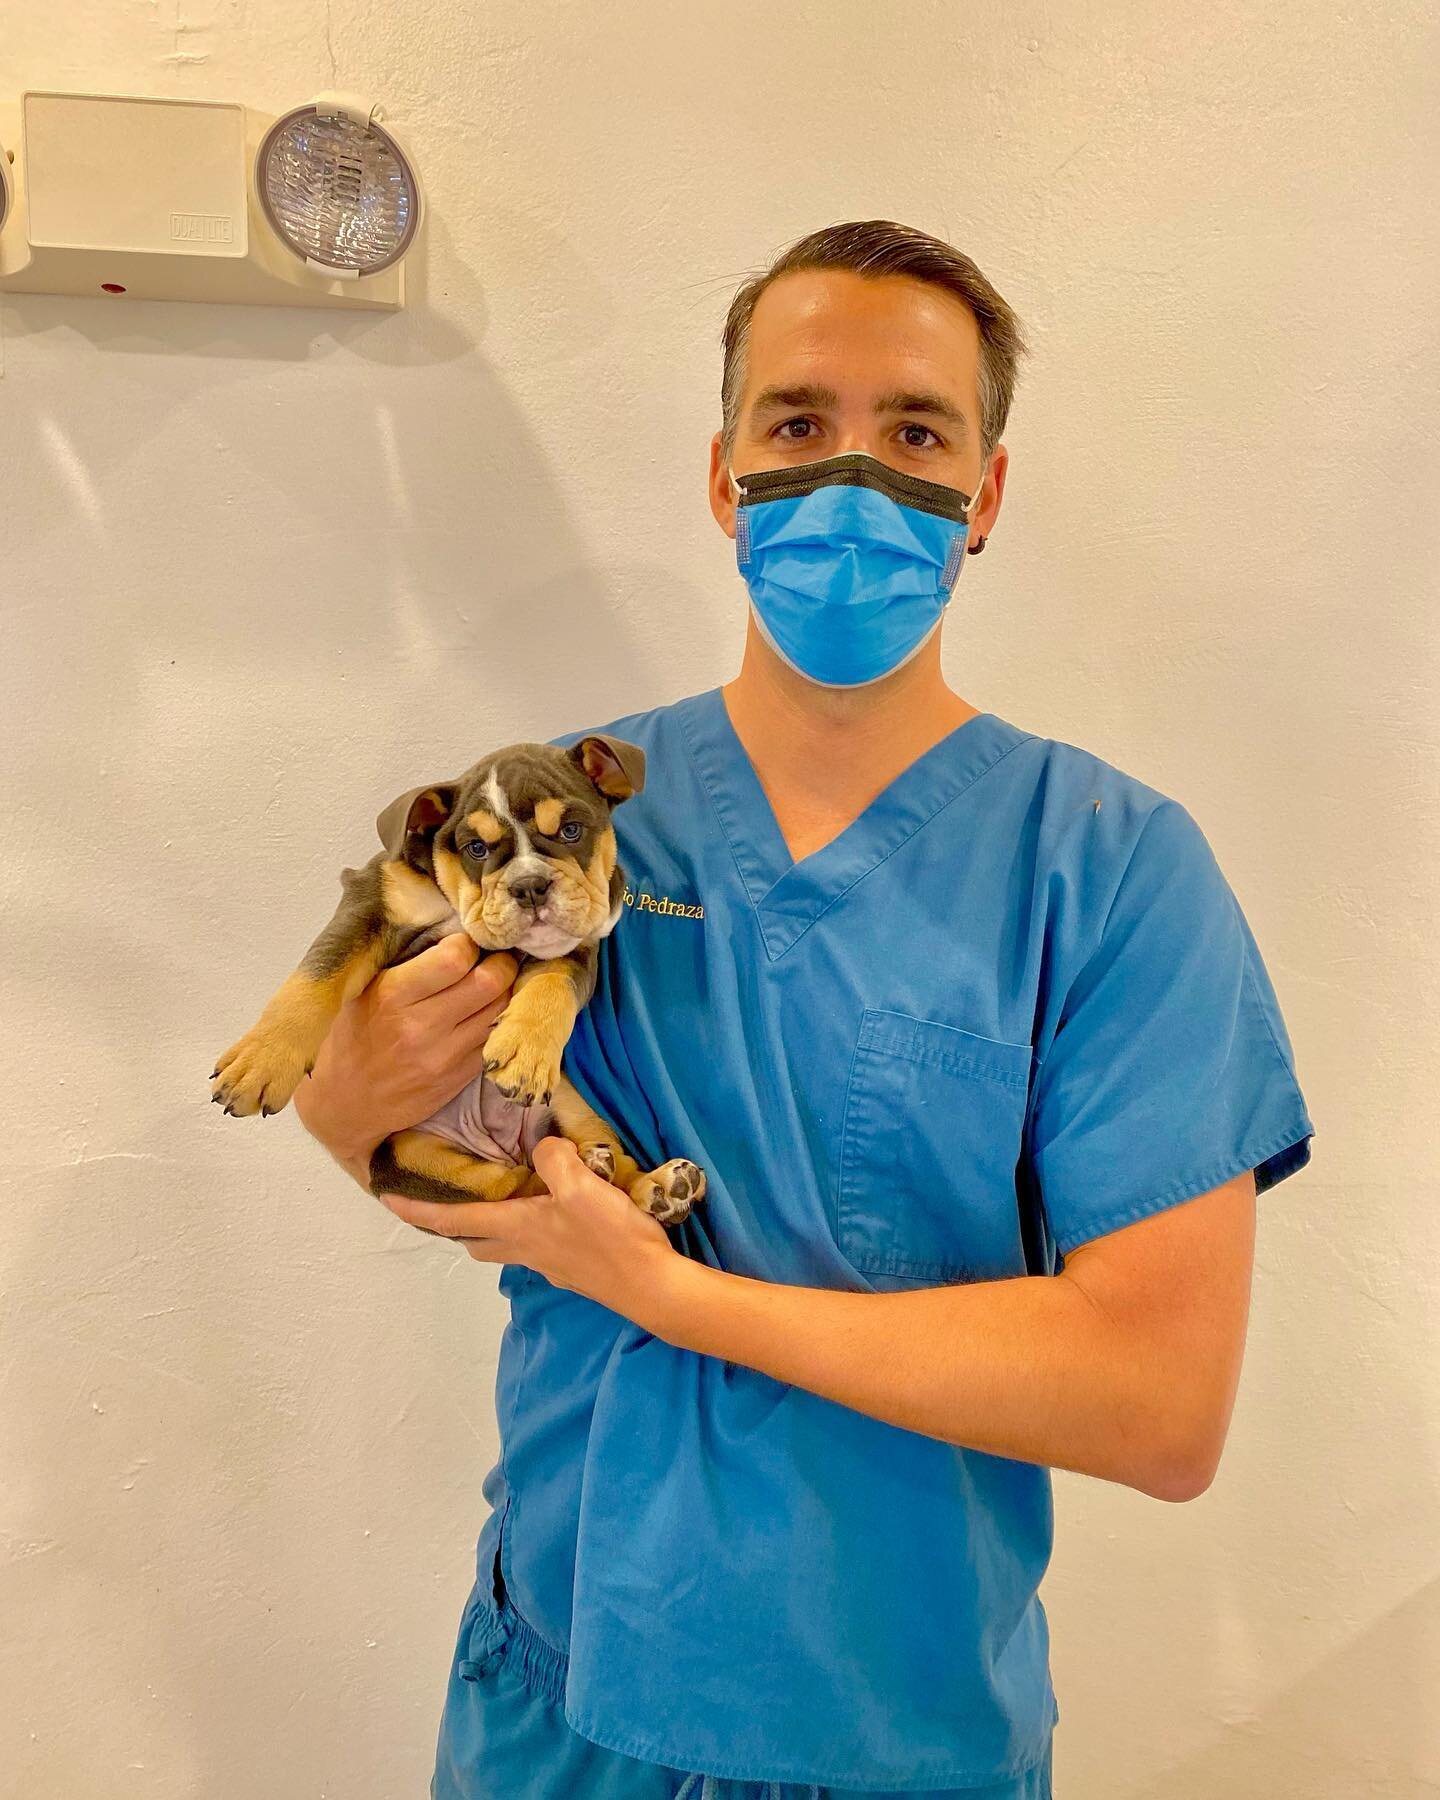 Happy birthday to Dr. Pedraza! His passion for helping animals in need go beyond the surgical table. The video in this post is him assisting a cat he performed a spinal surgery on for a paralyzed patient. (To remove a bullet lodged in the spine) The 